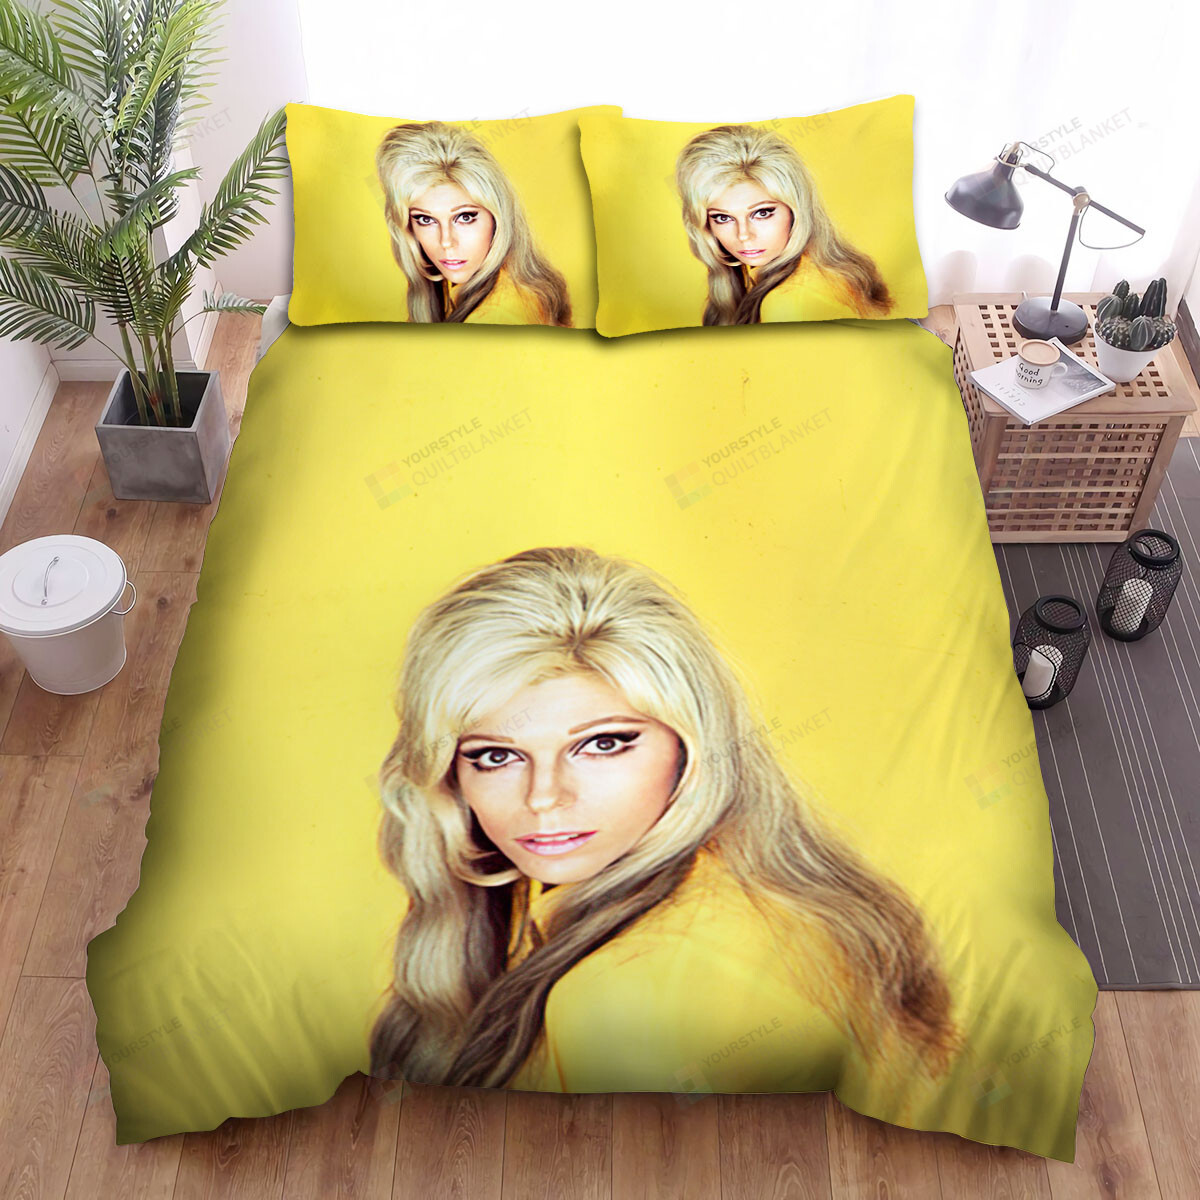 Nancy Sinatra Yellow Bed Sheets Spread Comforter Duvet Cover Bedding Sets